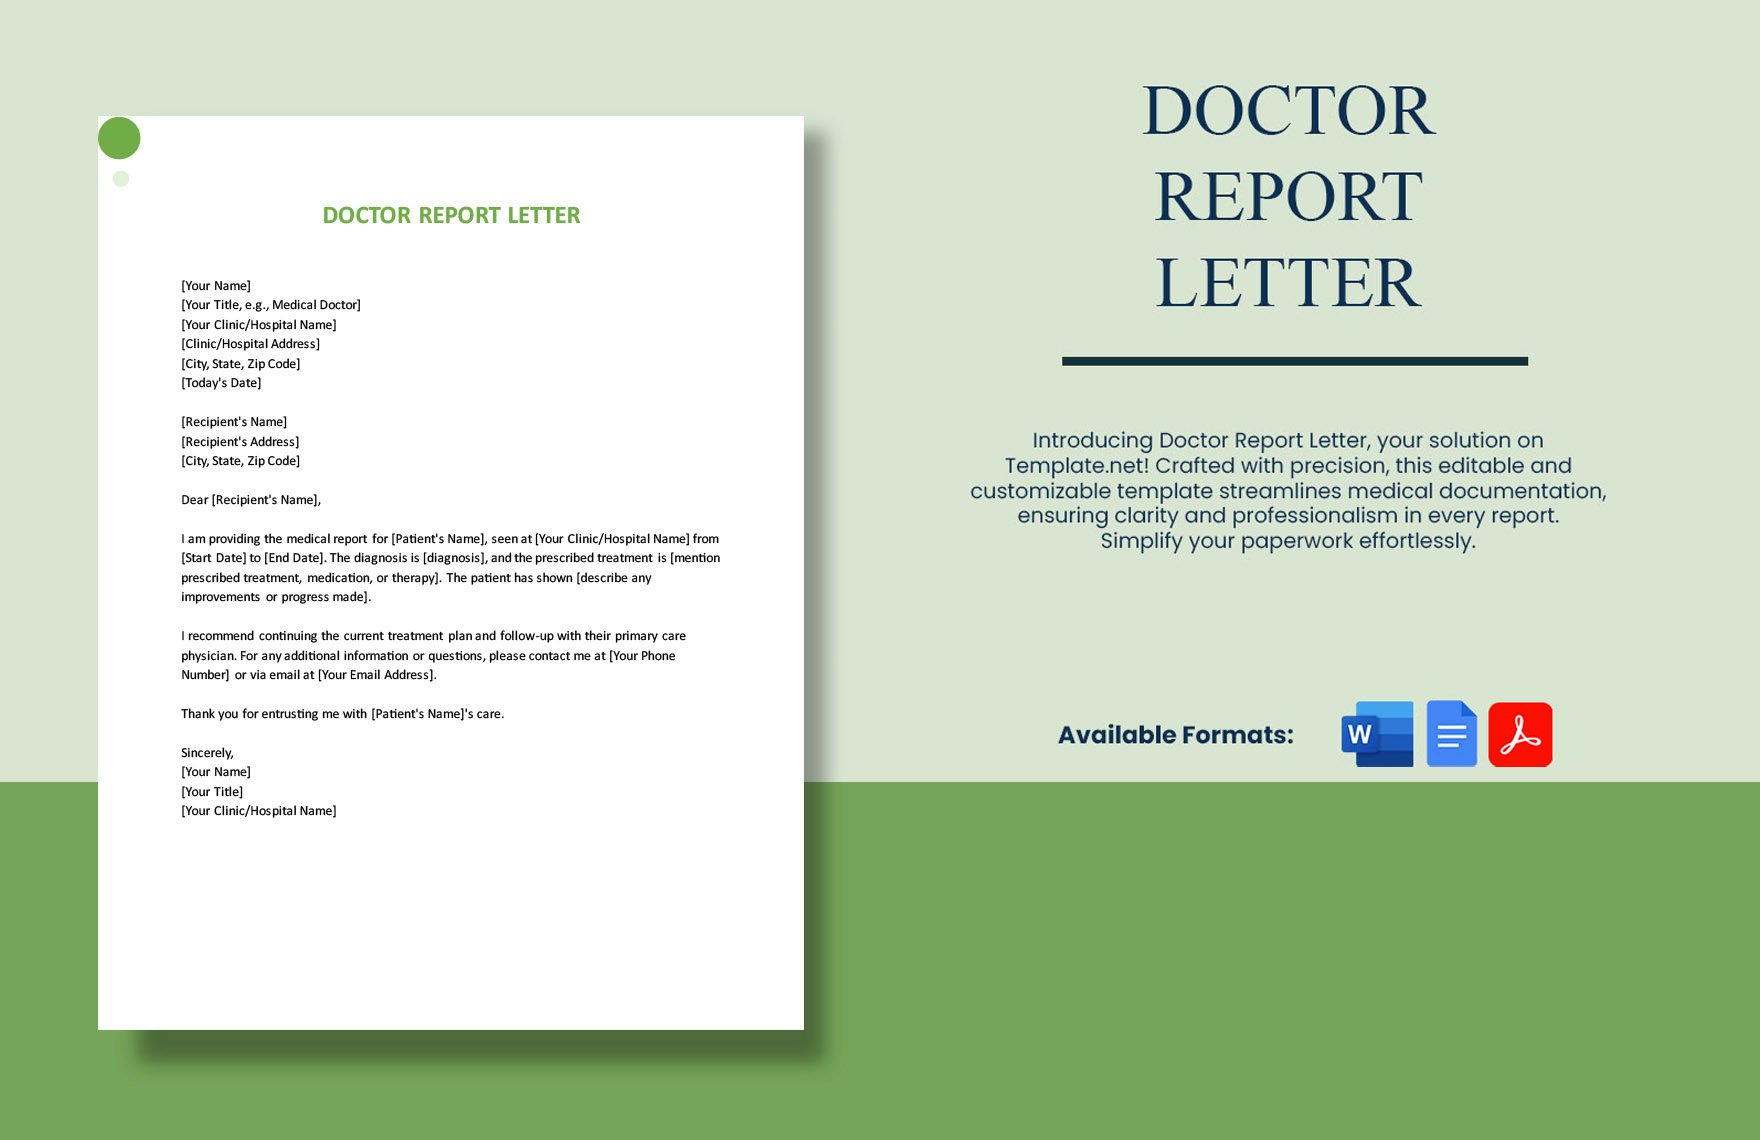 Doctor Report Letter